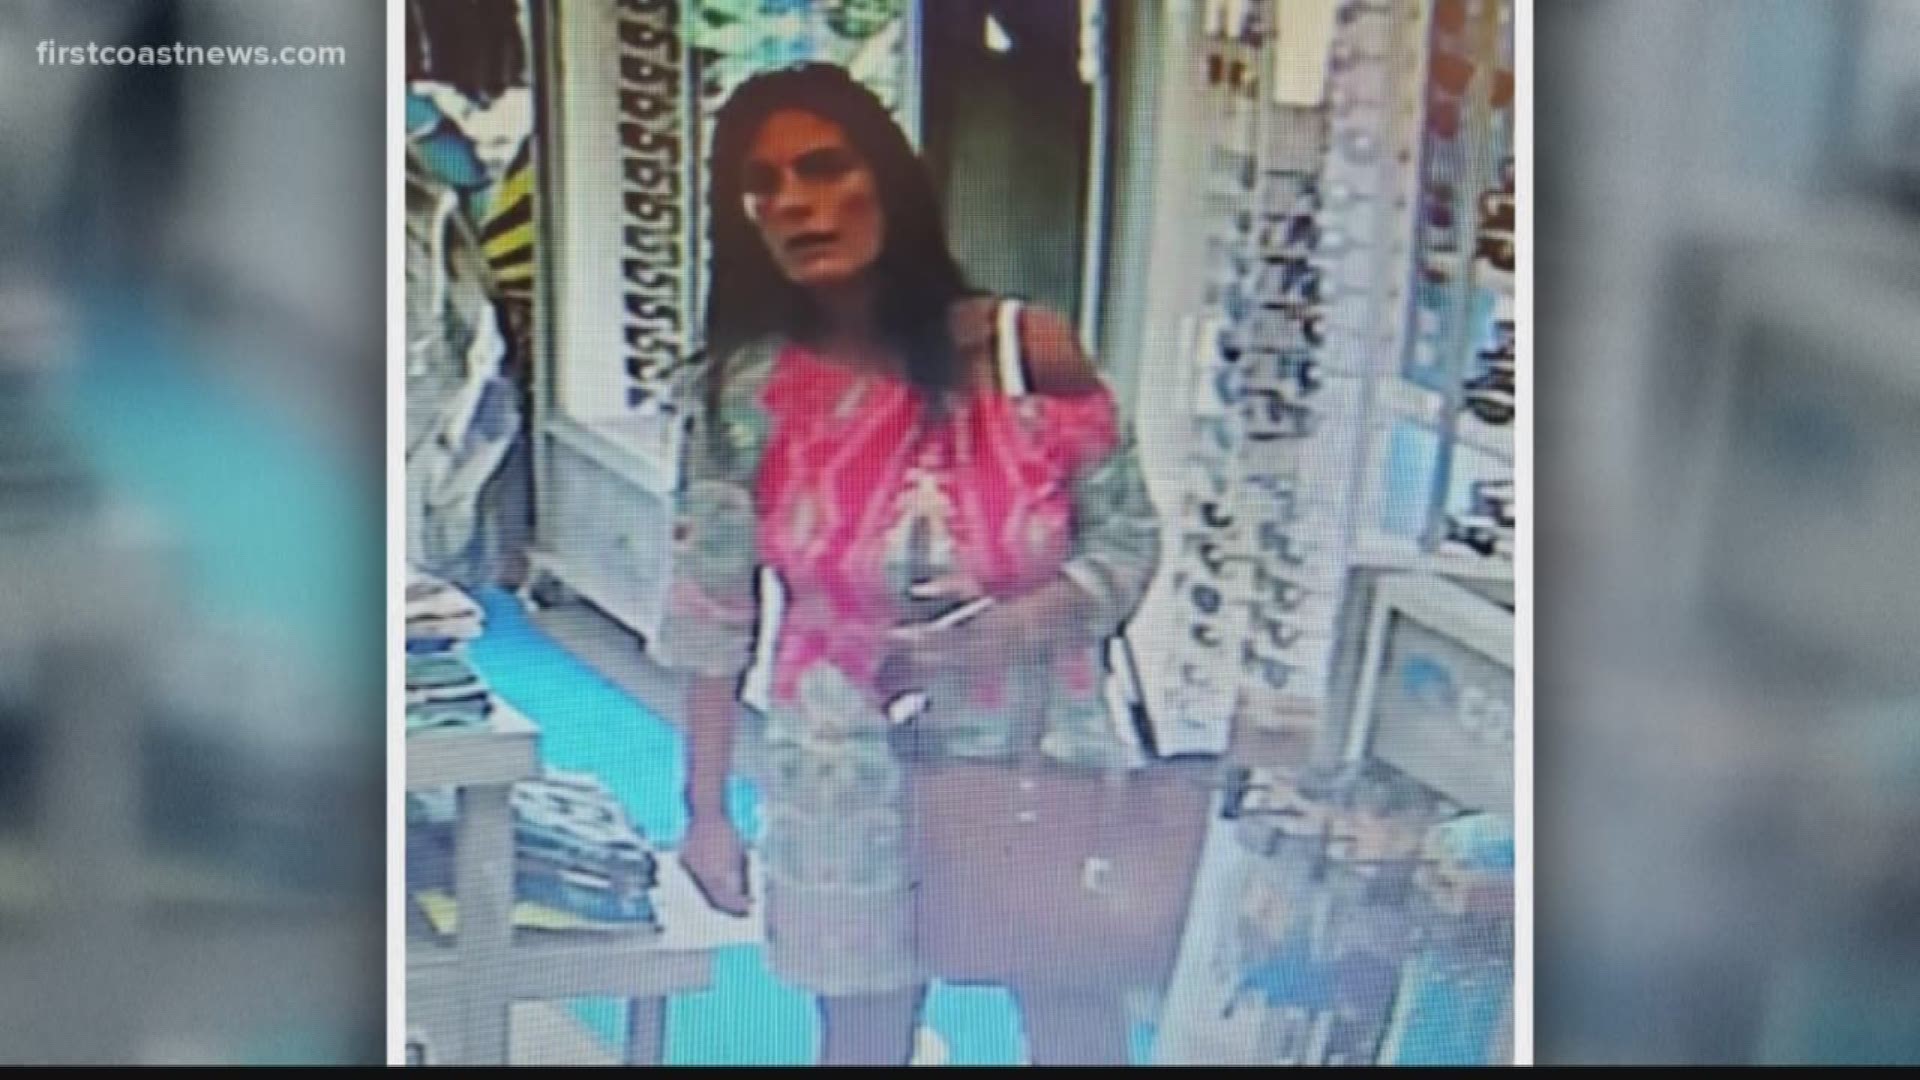 After distracting the salesperson, deputies say the woman swiped a pair of $279 Costa Anna sunglasses.